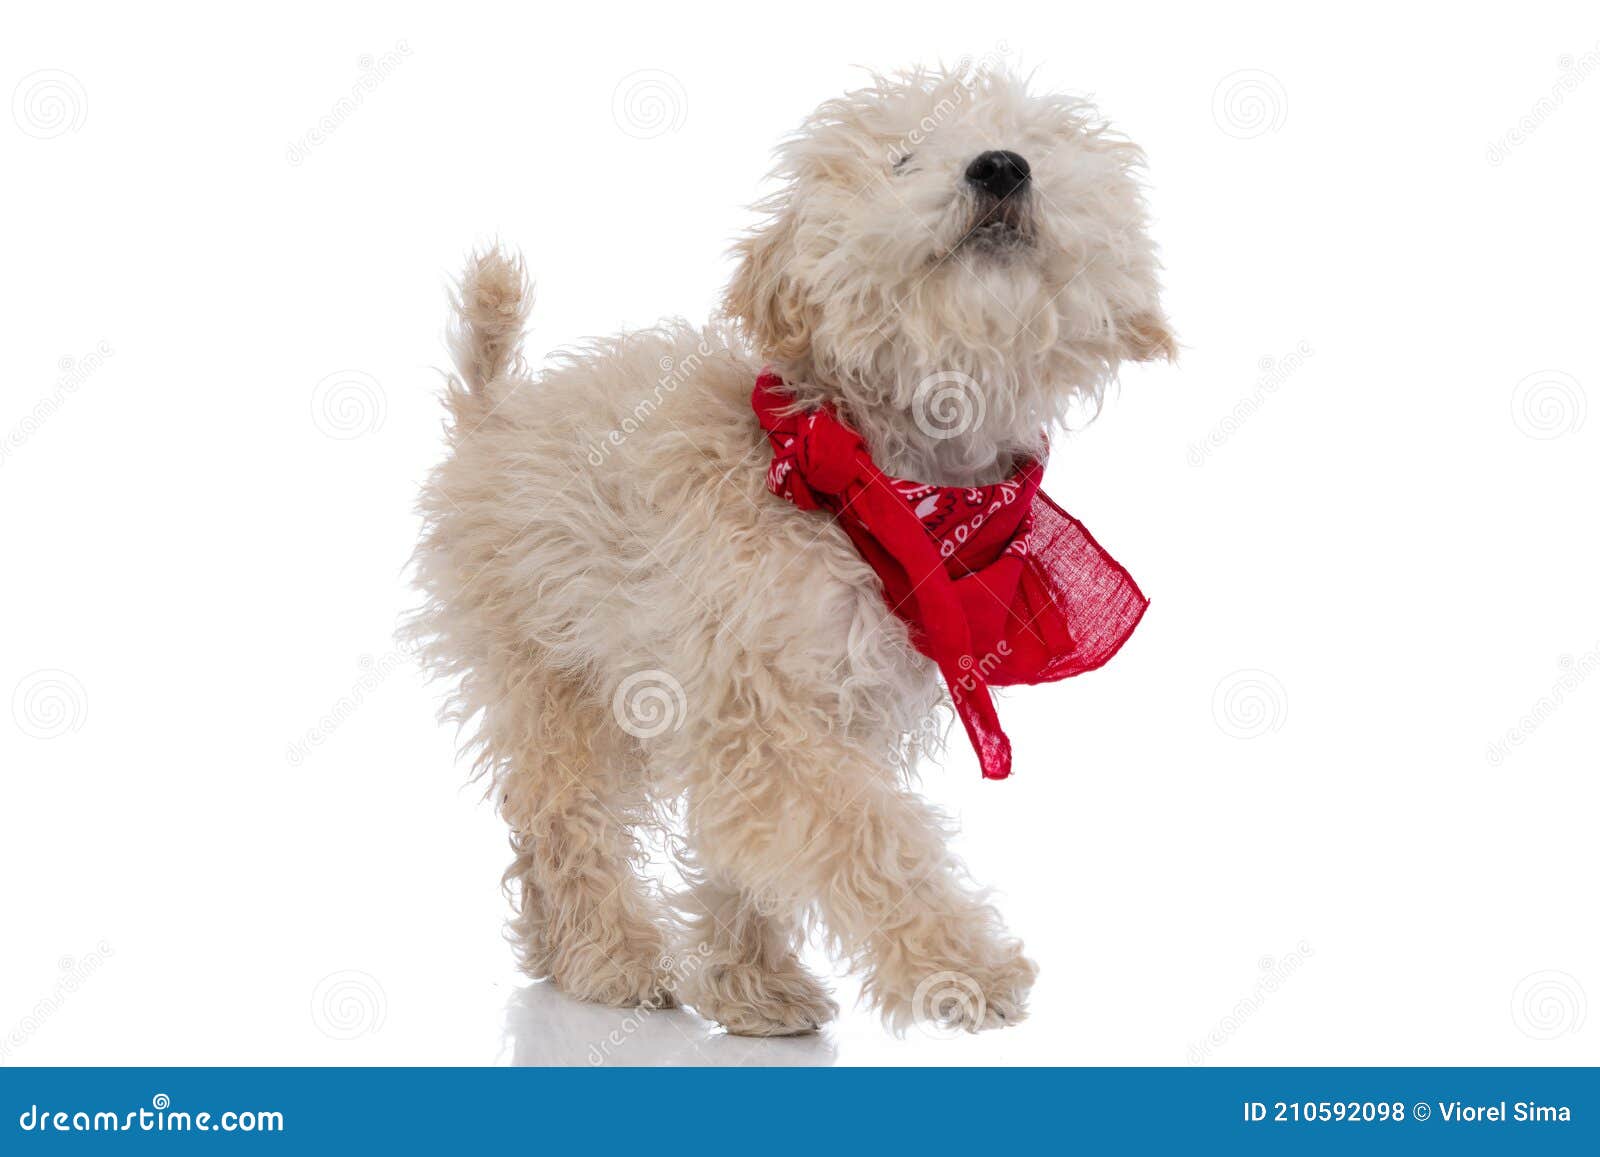 adorable caniche dog looking up, wearing a red bandana